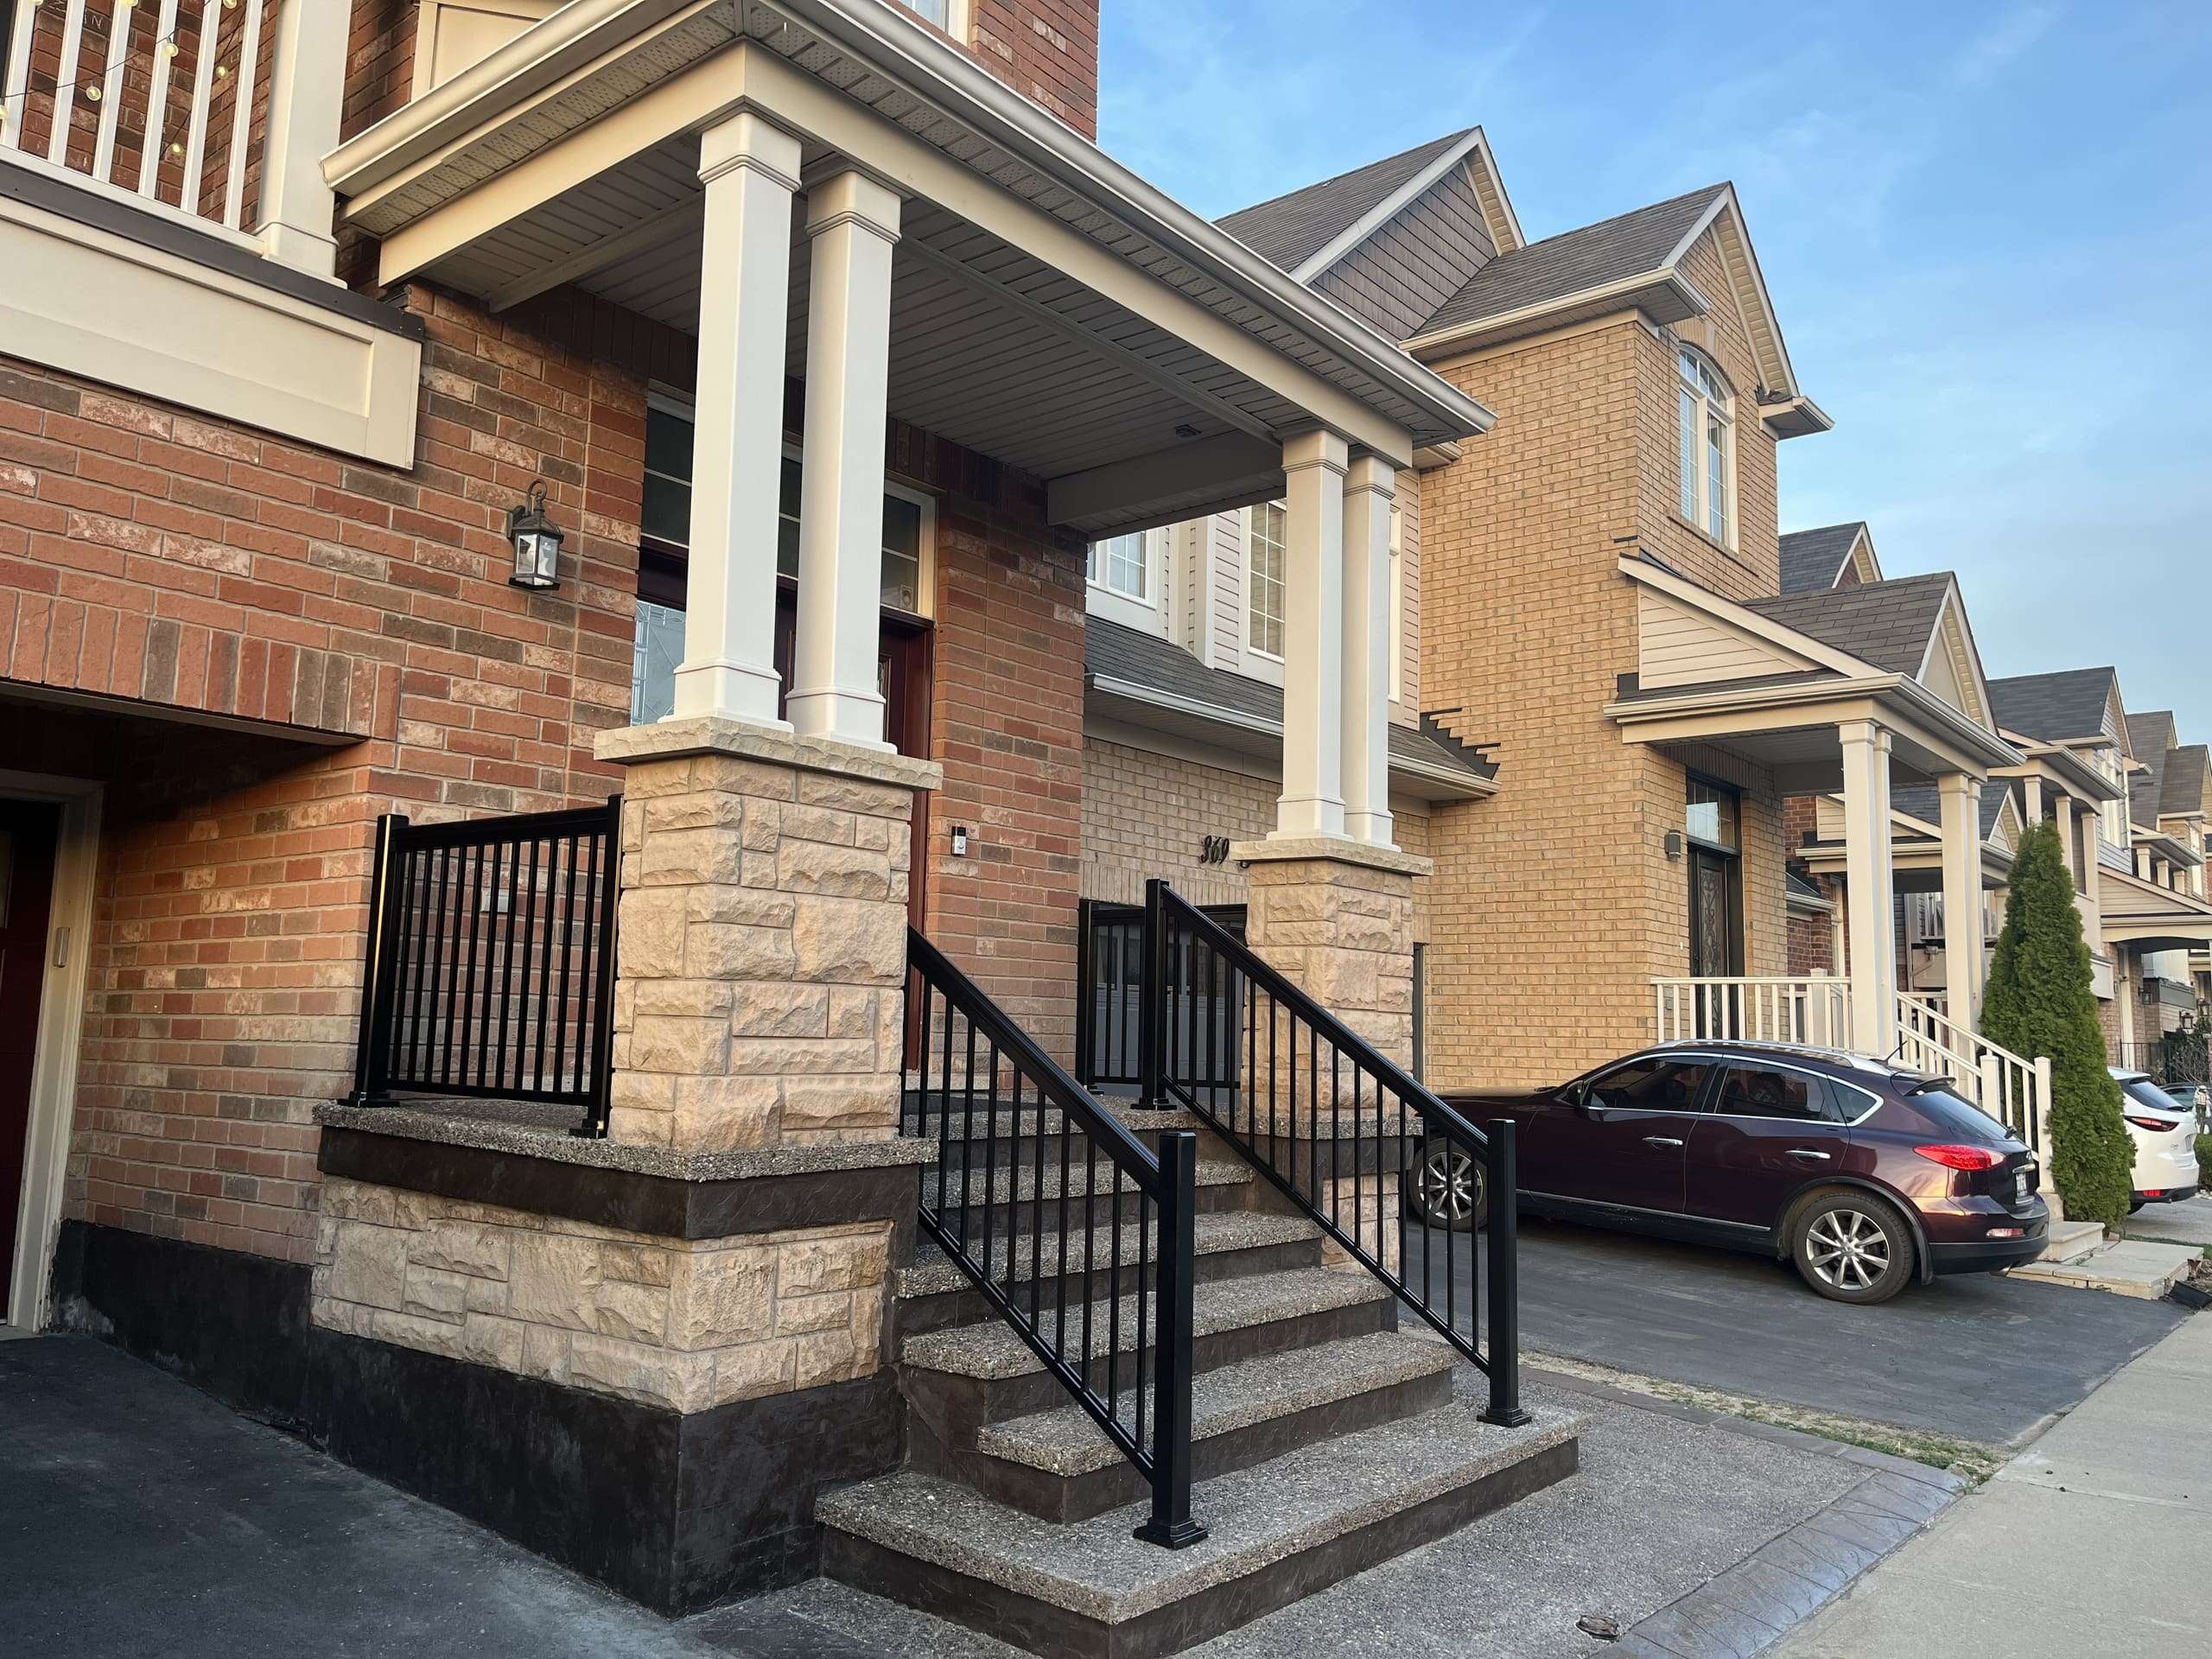 Black Aluminum Porch Railings Installation with Pickets (Georgetown, ON)